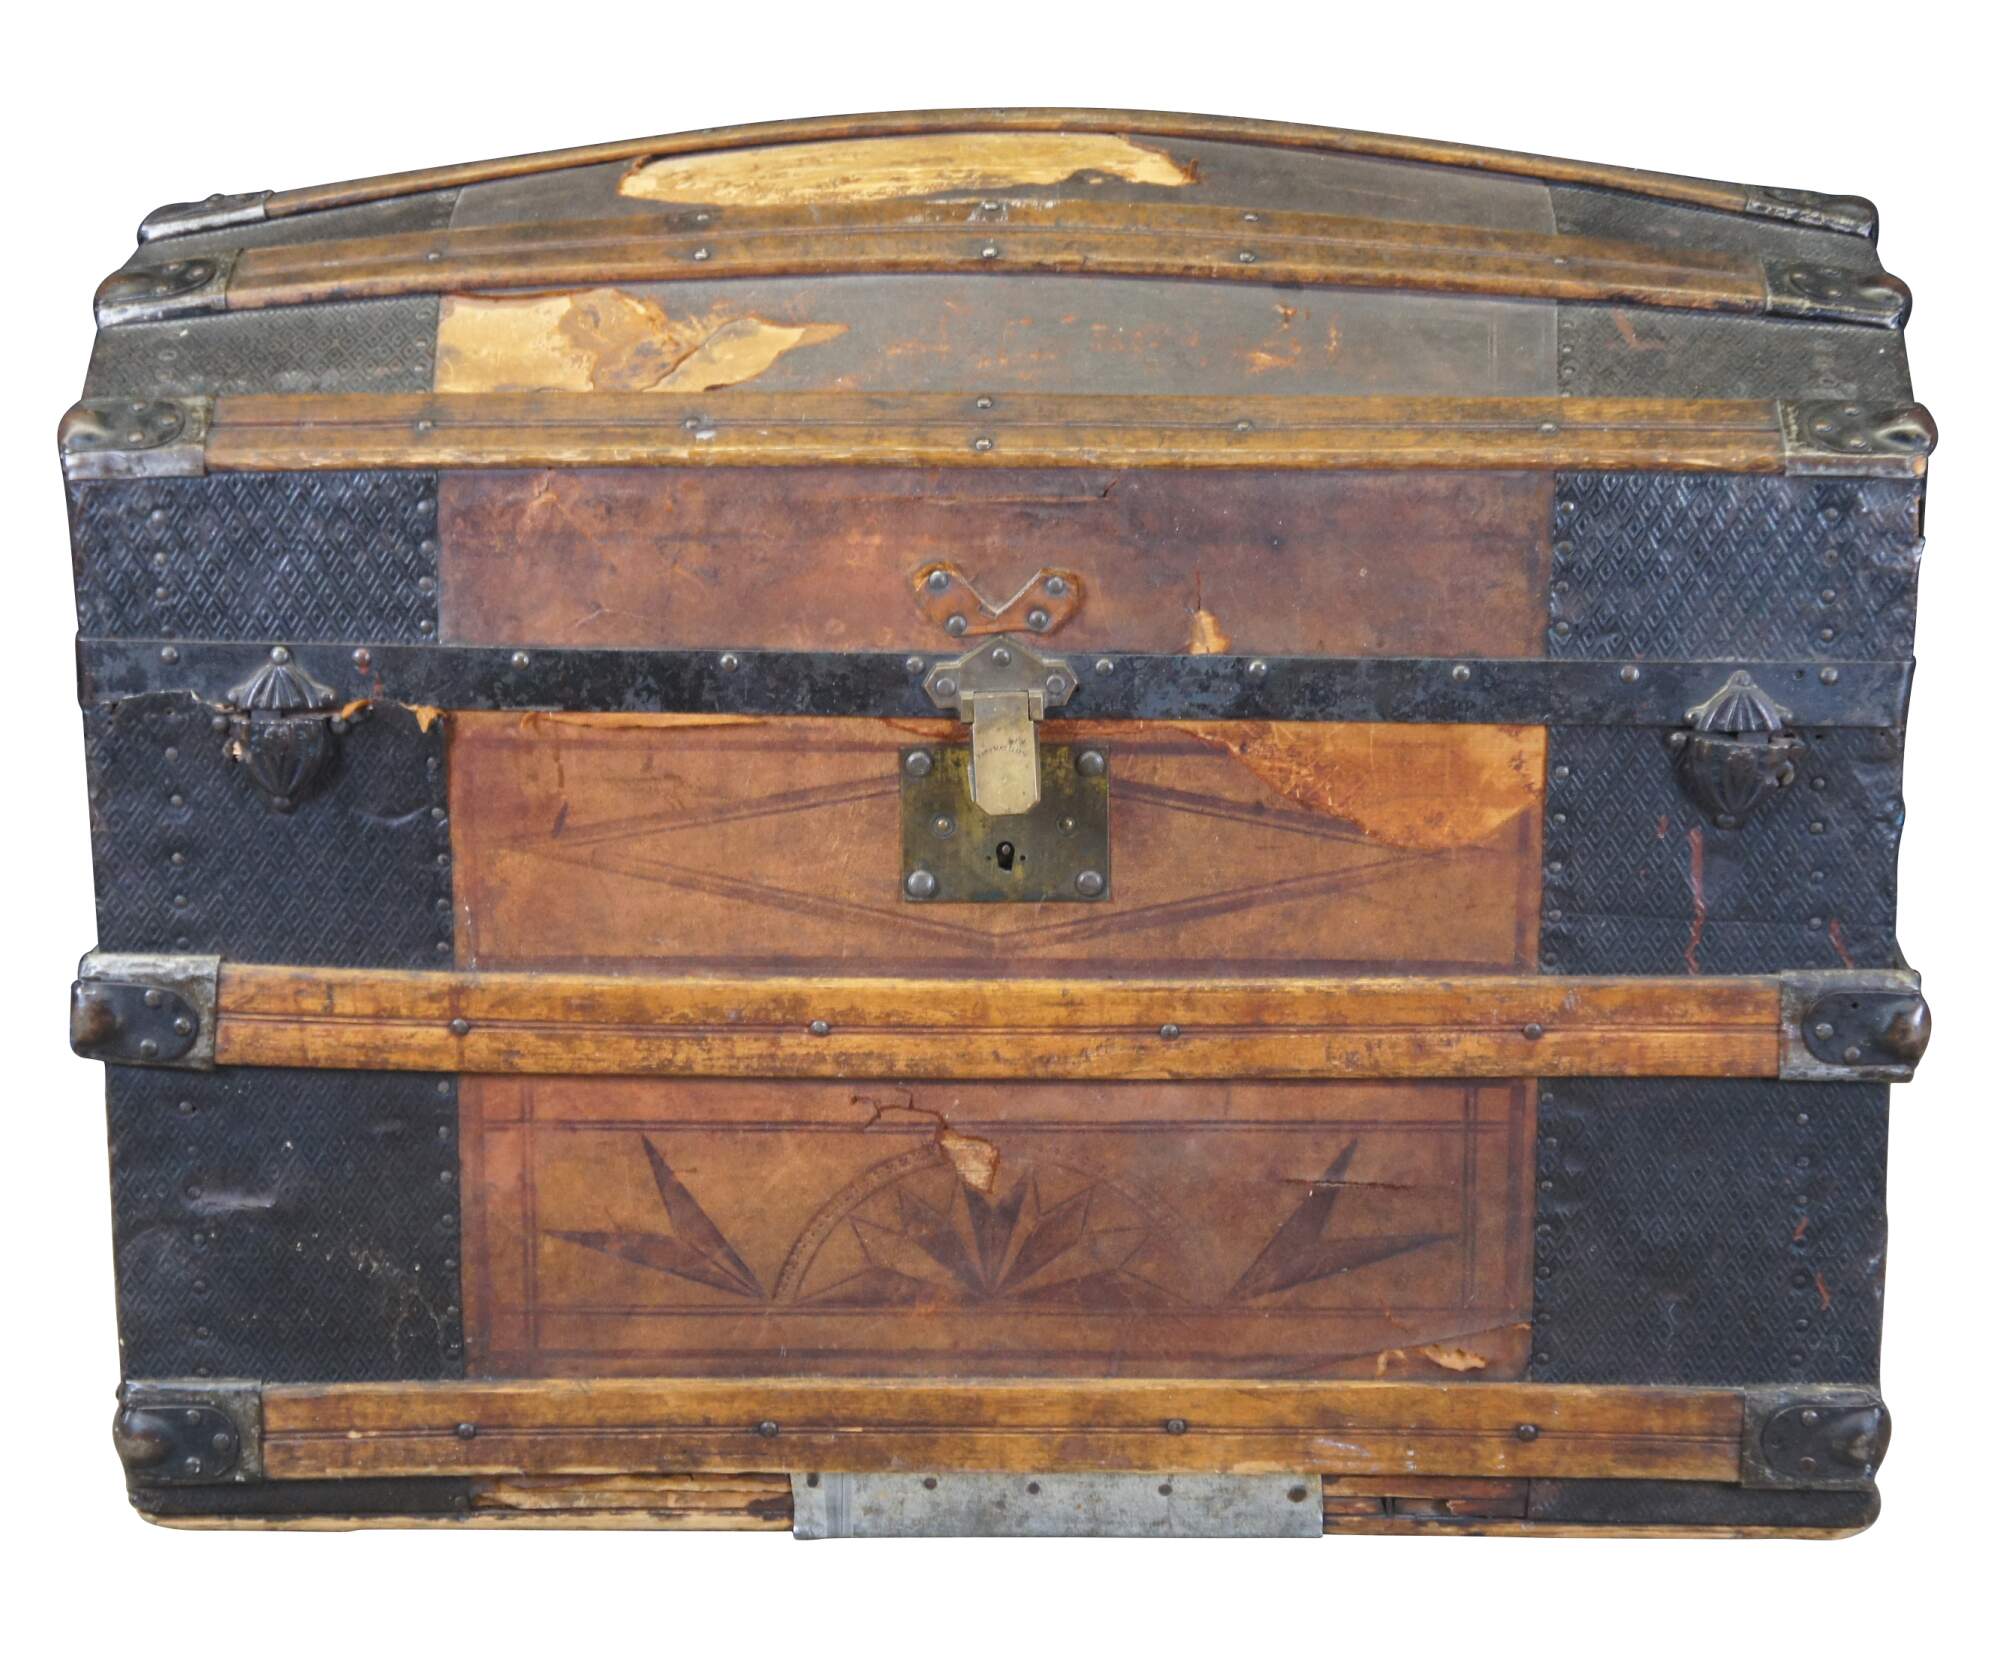 ANTIQUE 19THC LOUIS VUITTON EXTRA LARGE TRUNK IN WOVEN CANVAS